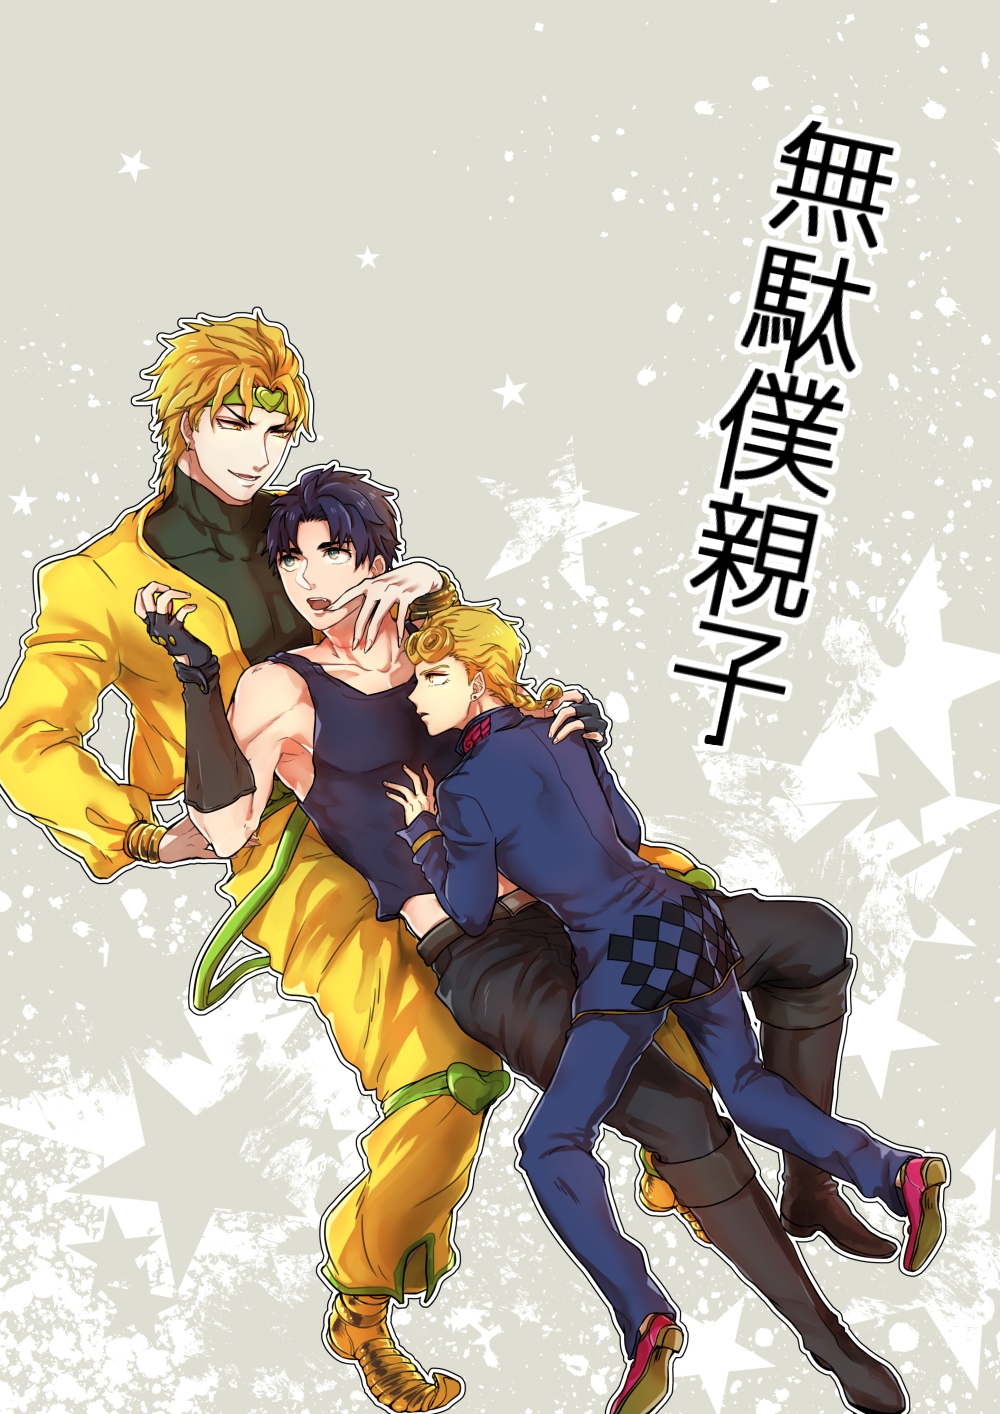 blonde_hair boots braid dio_brando earrings father_and_son fingerless_gloves giorno_giovanna gloves green_eyes headband highres jewelry jojo_no_kimyou_na_bouken jonathan_joestar knee_pads lying_on_person outline pointy_shoes shoes star starry_background tank_top translation_request yawaraka yellow_eyes